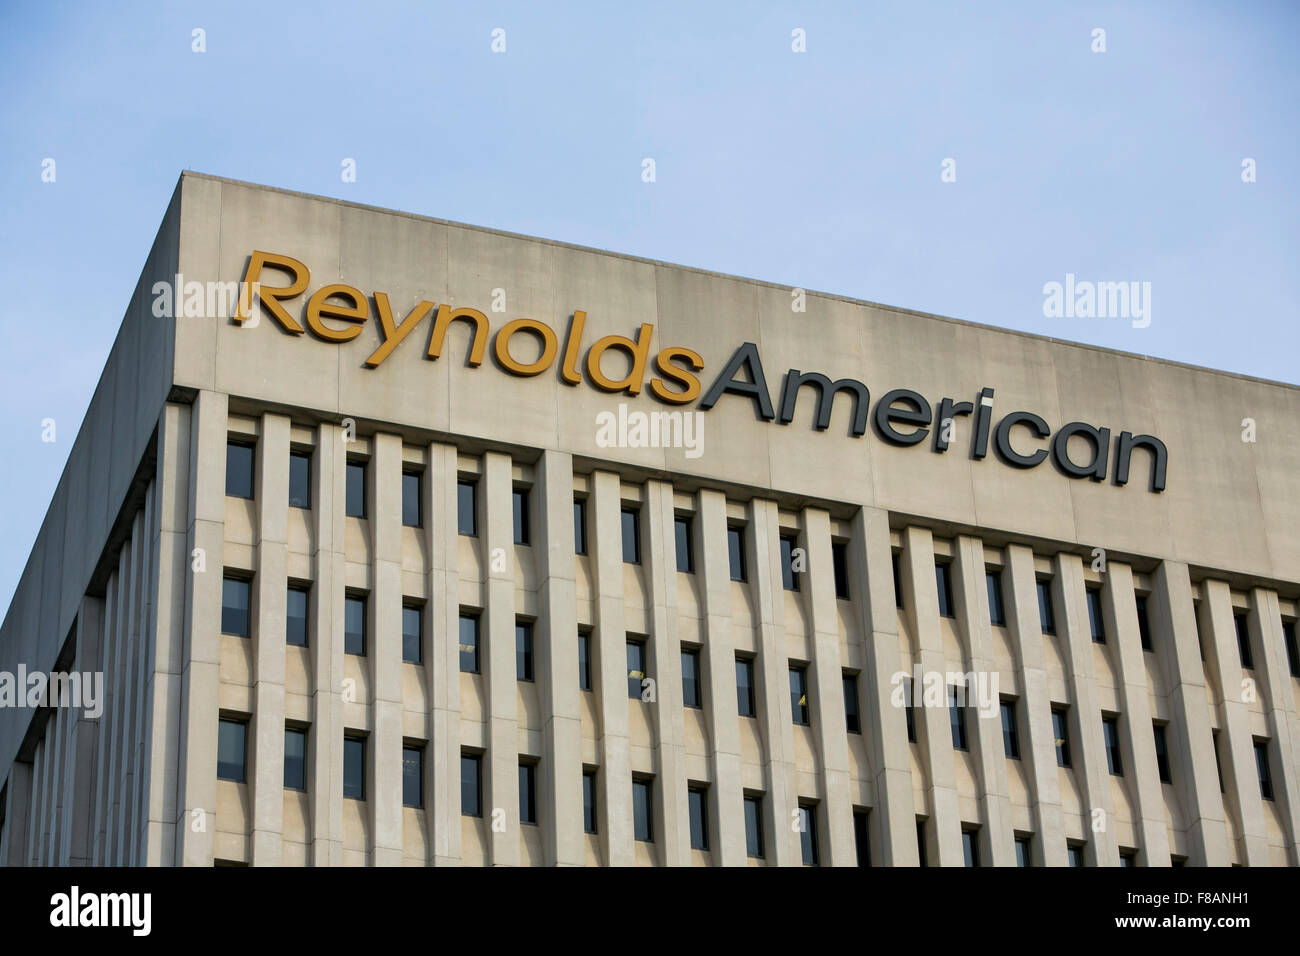 A logo sign outside of the headquarters of Reynolds American, Inc., in Winston-Salem, North Carolina on November 27, 2015. Stock Photo